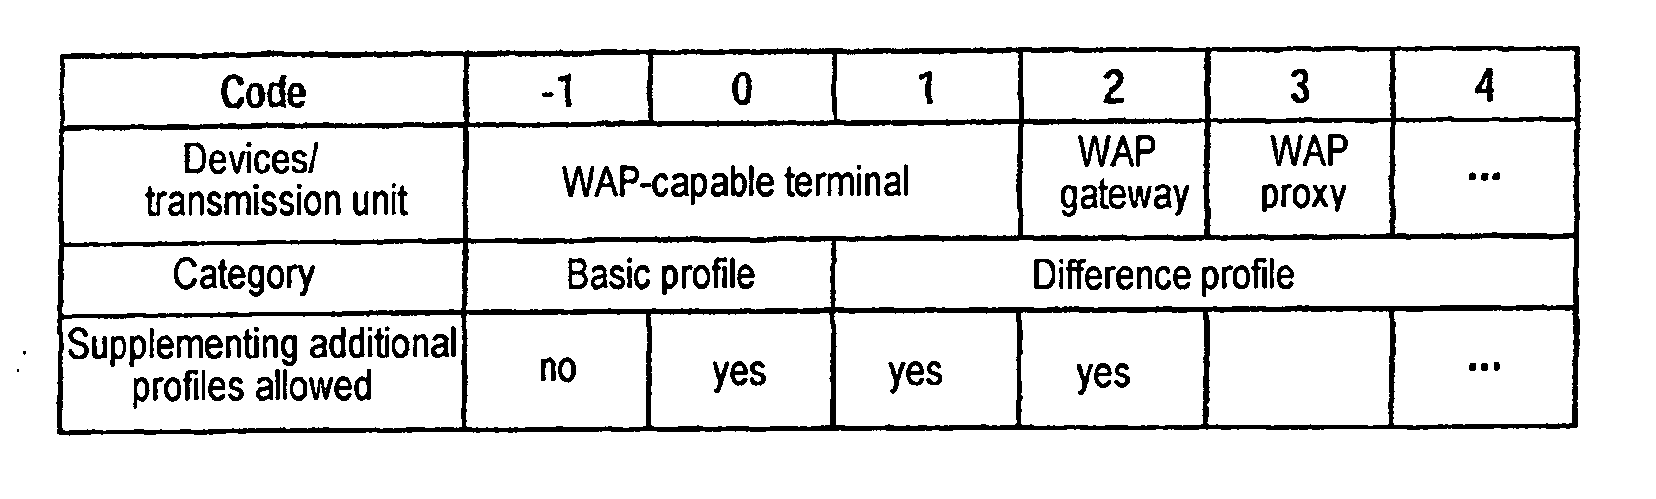 Method for the transmission of user data objects according to a profile information object